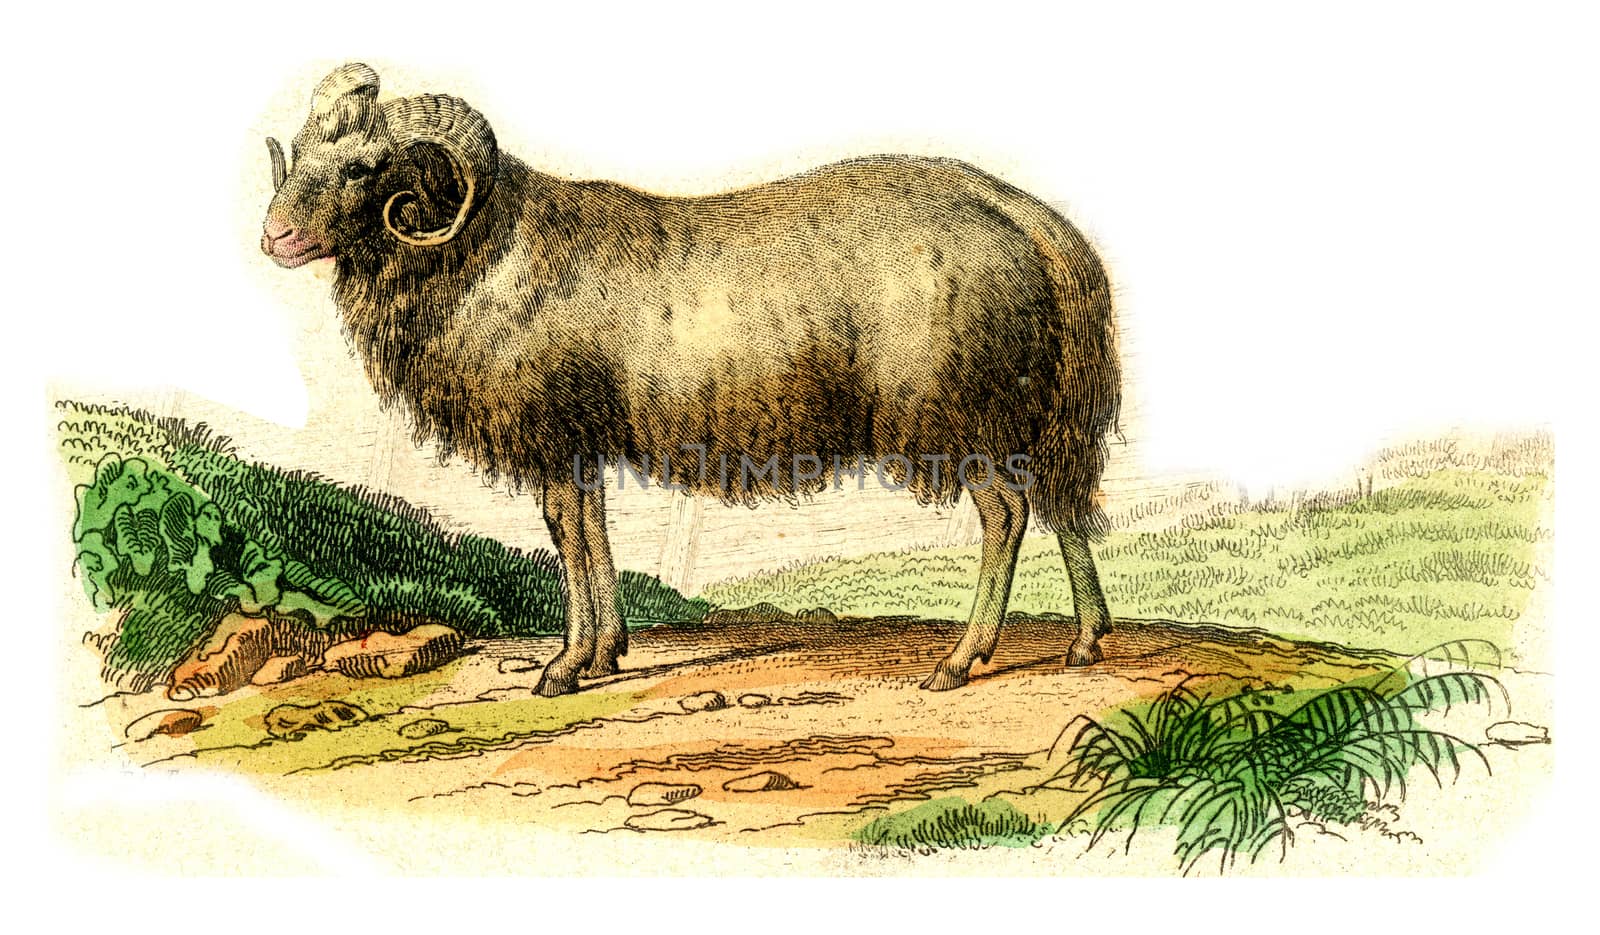 The ram, vintage engraved illustration. From Buffon Complete Work.
